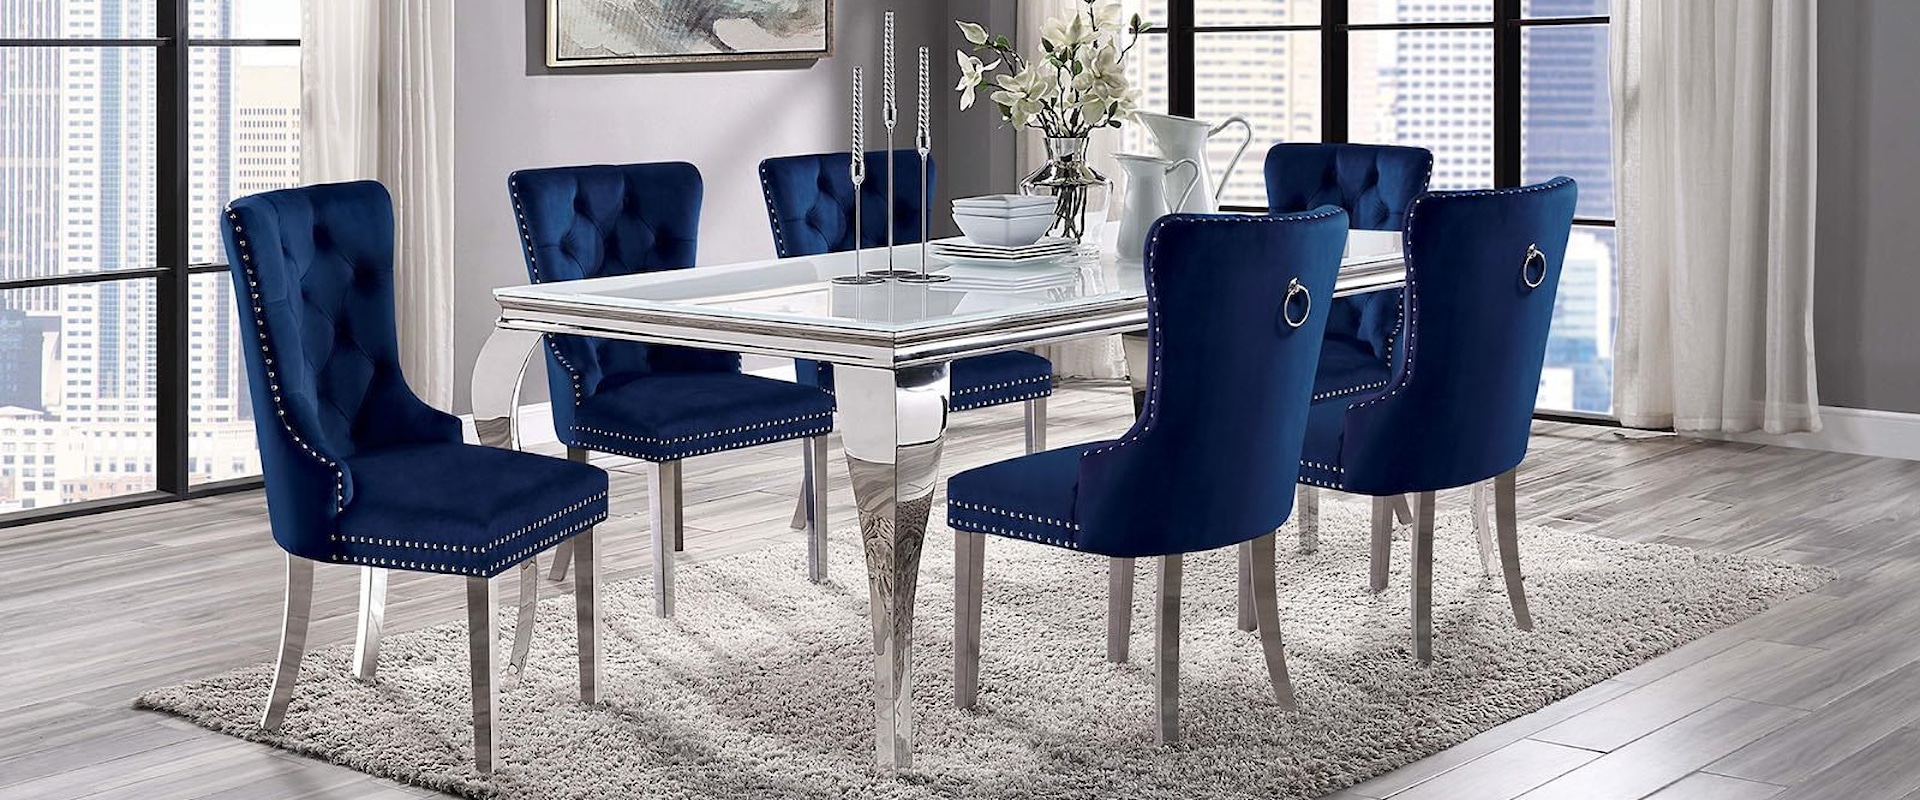 7 Pc. Dining Table Set, Navy Chairs